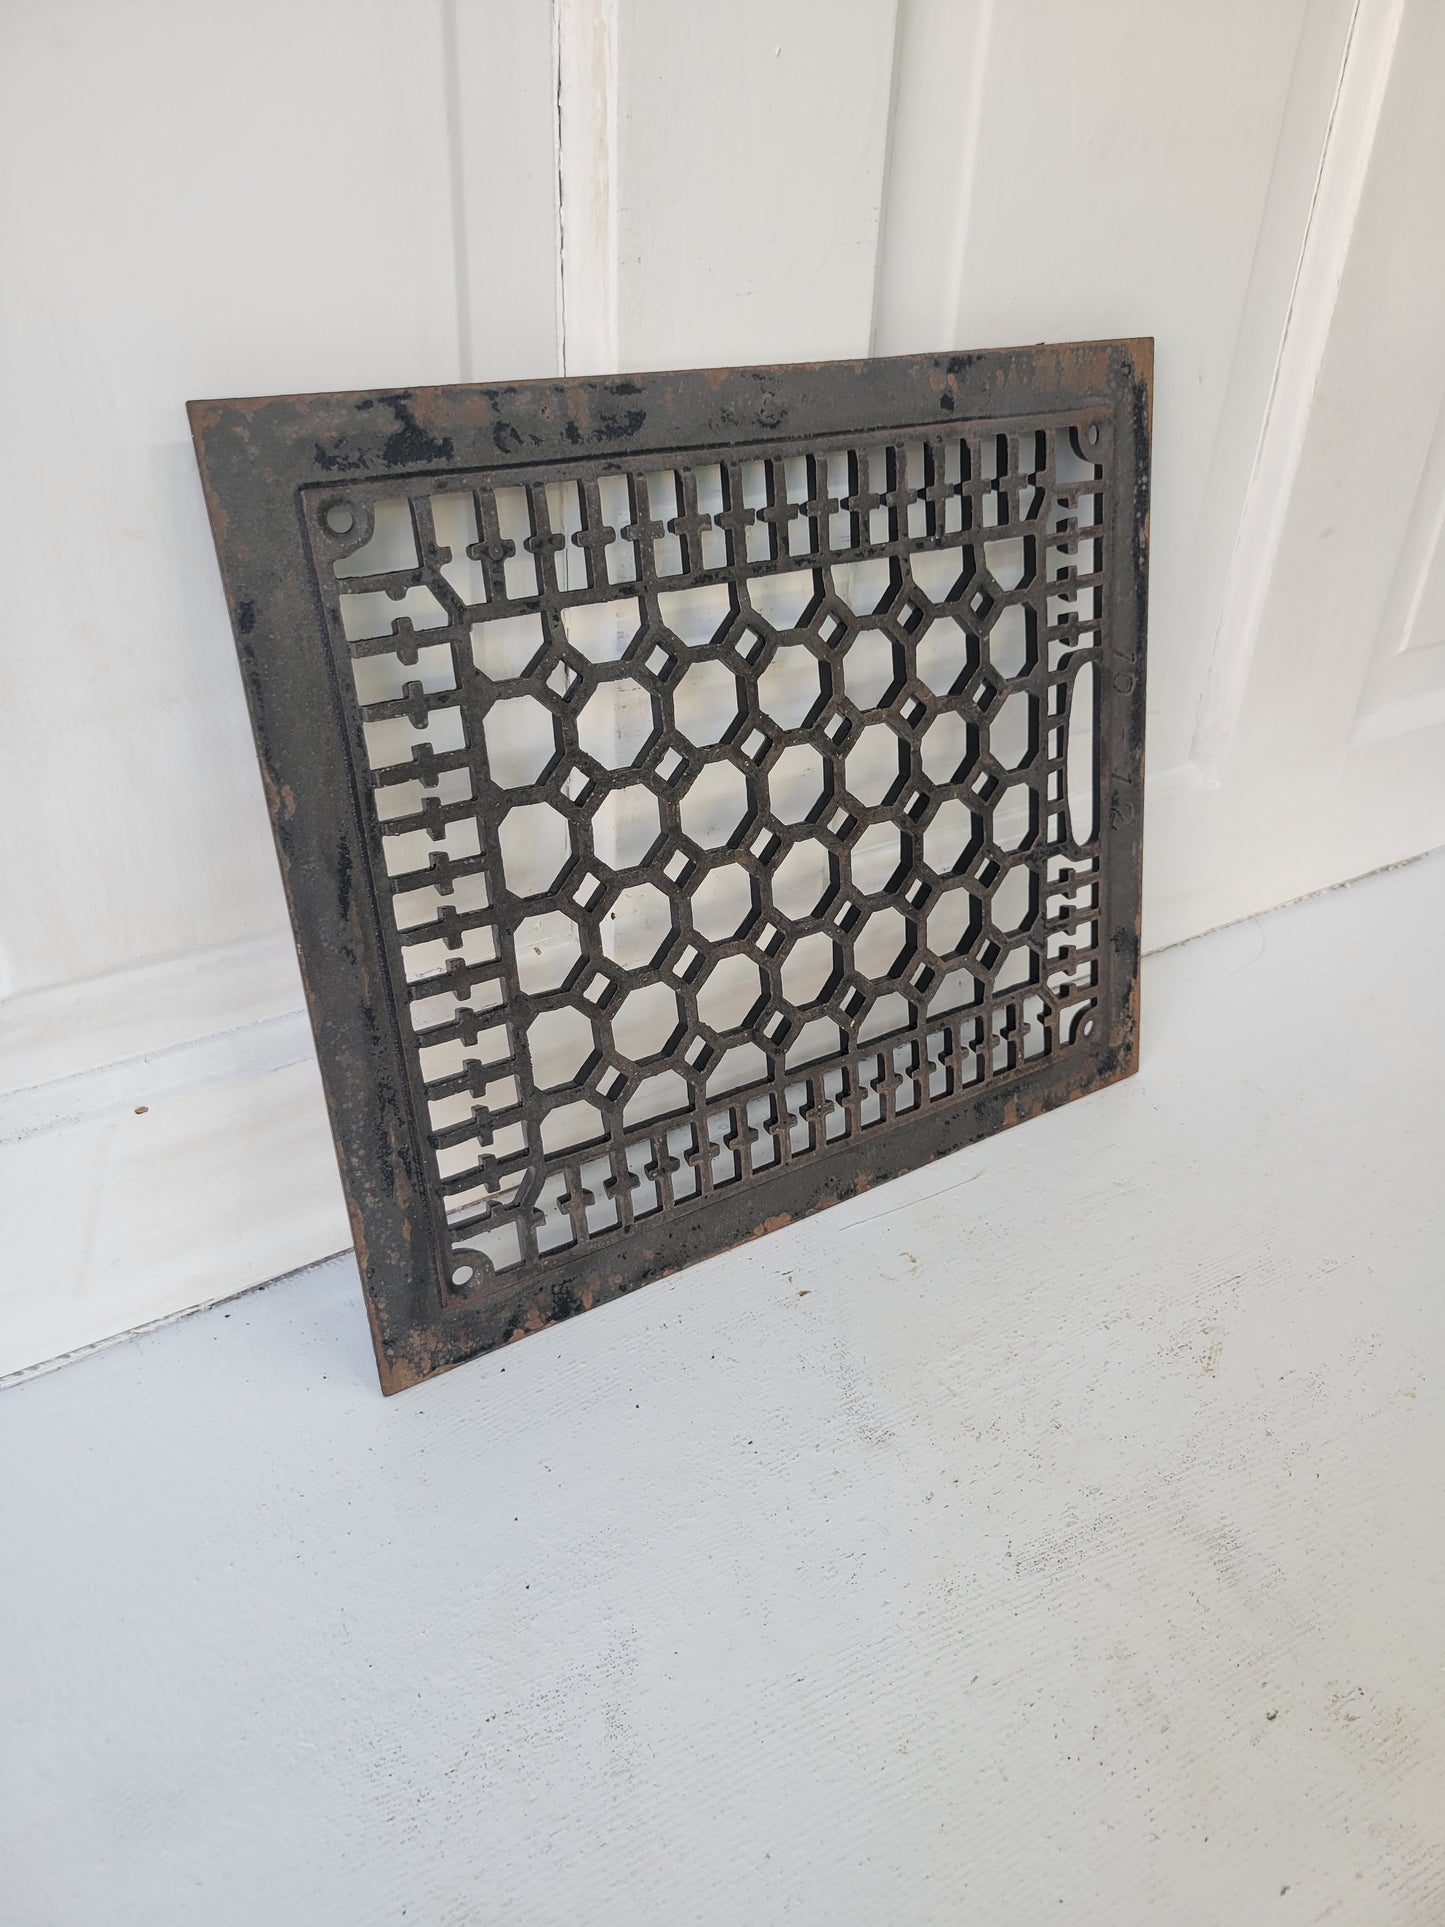 12 x 14 Antique Cast Iron Fancy Vent Cover, Floor Register Cover with Dampers #090402